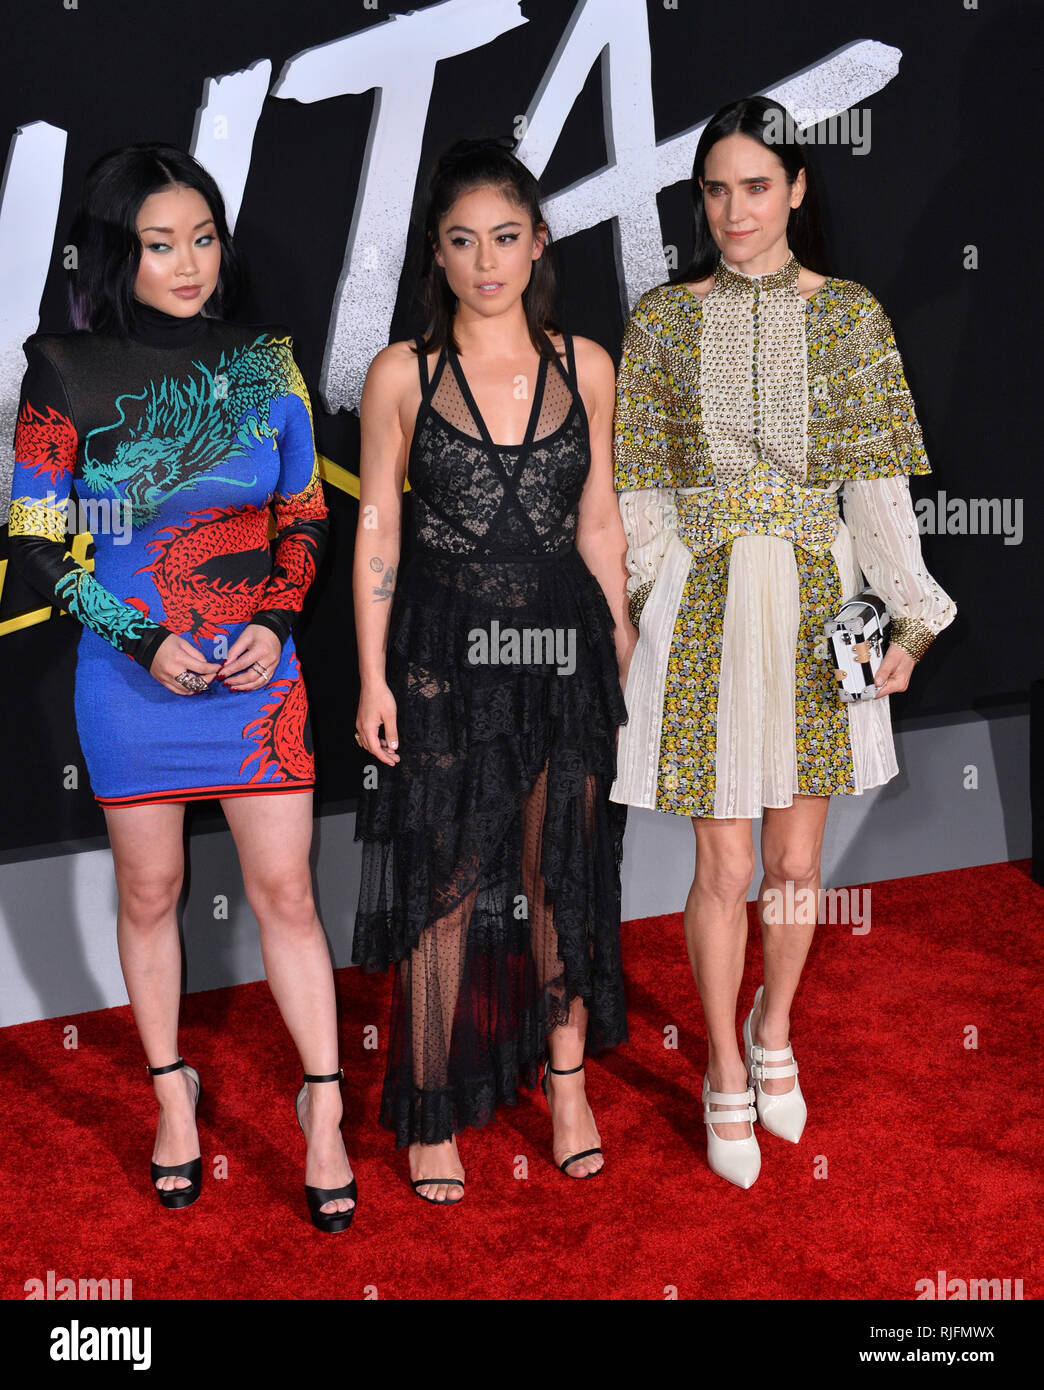 Los Angeles, USA. 05th Feb, 2019. Lana Condor, Rosa Salazar & Jennifer  Connelly at the premiere for 